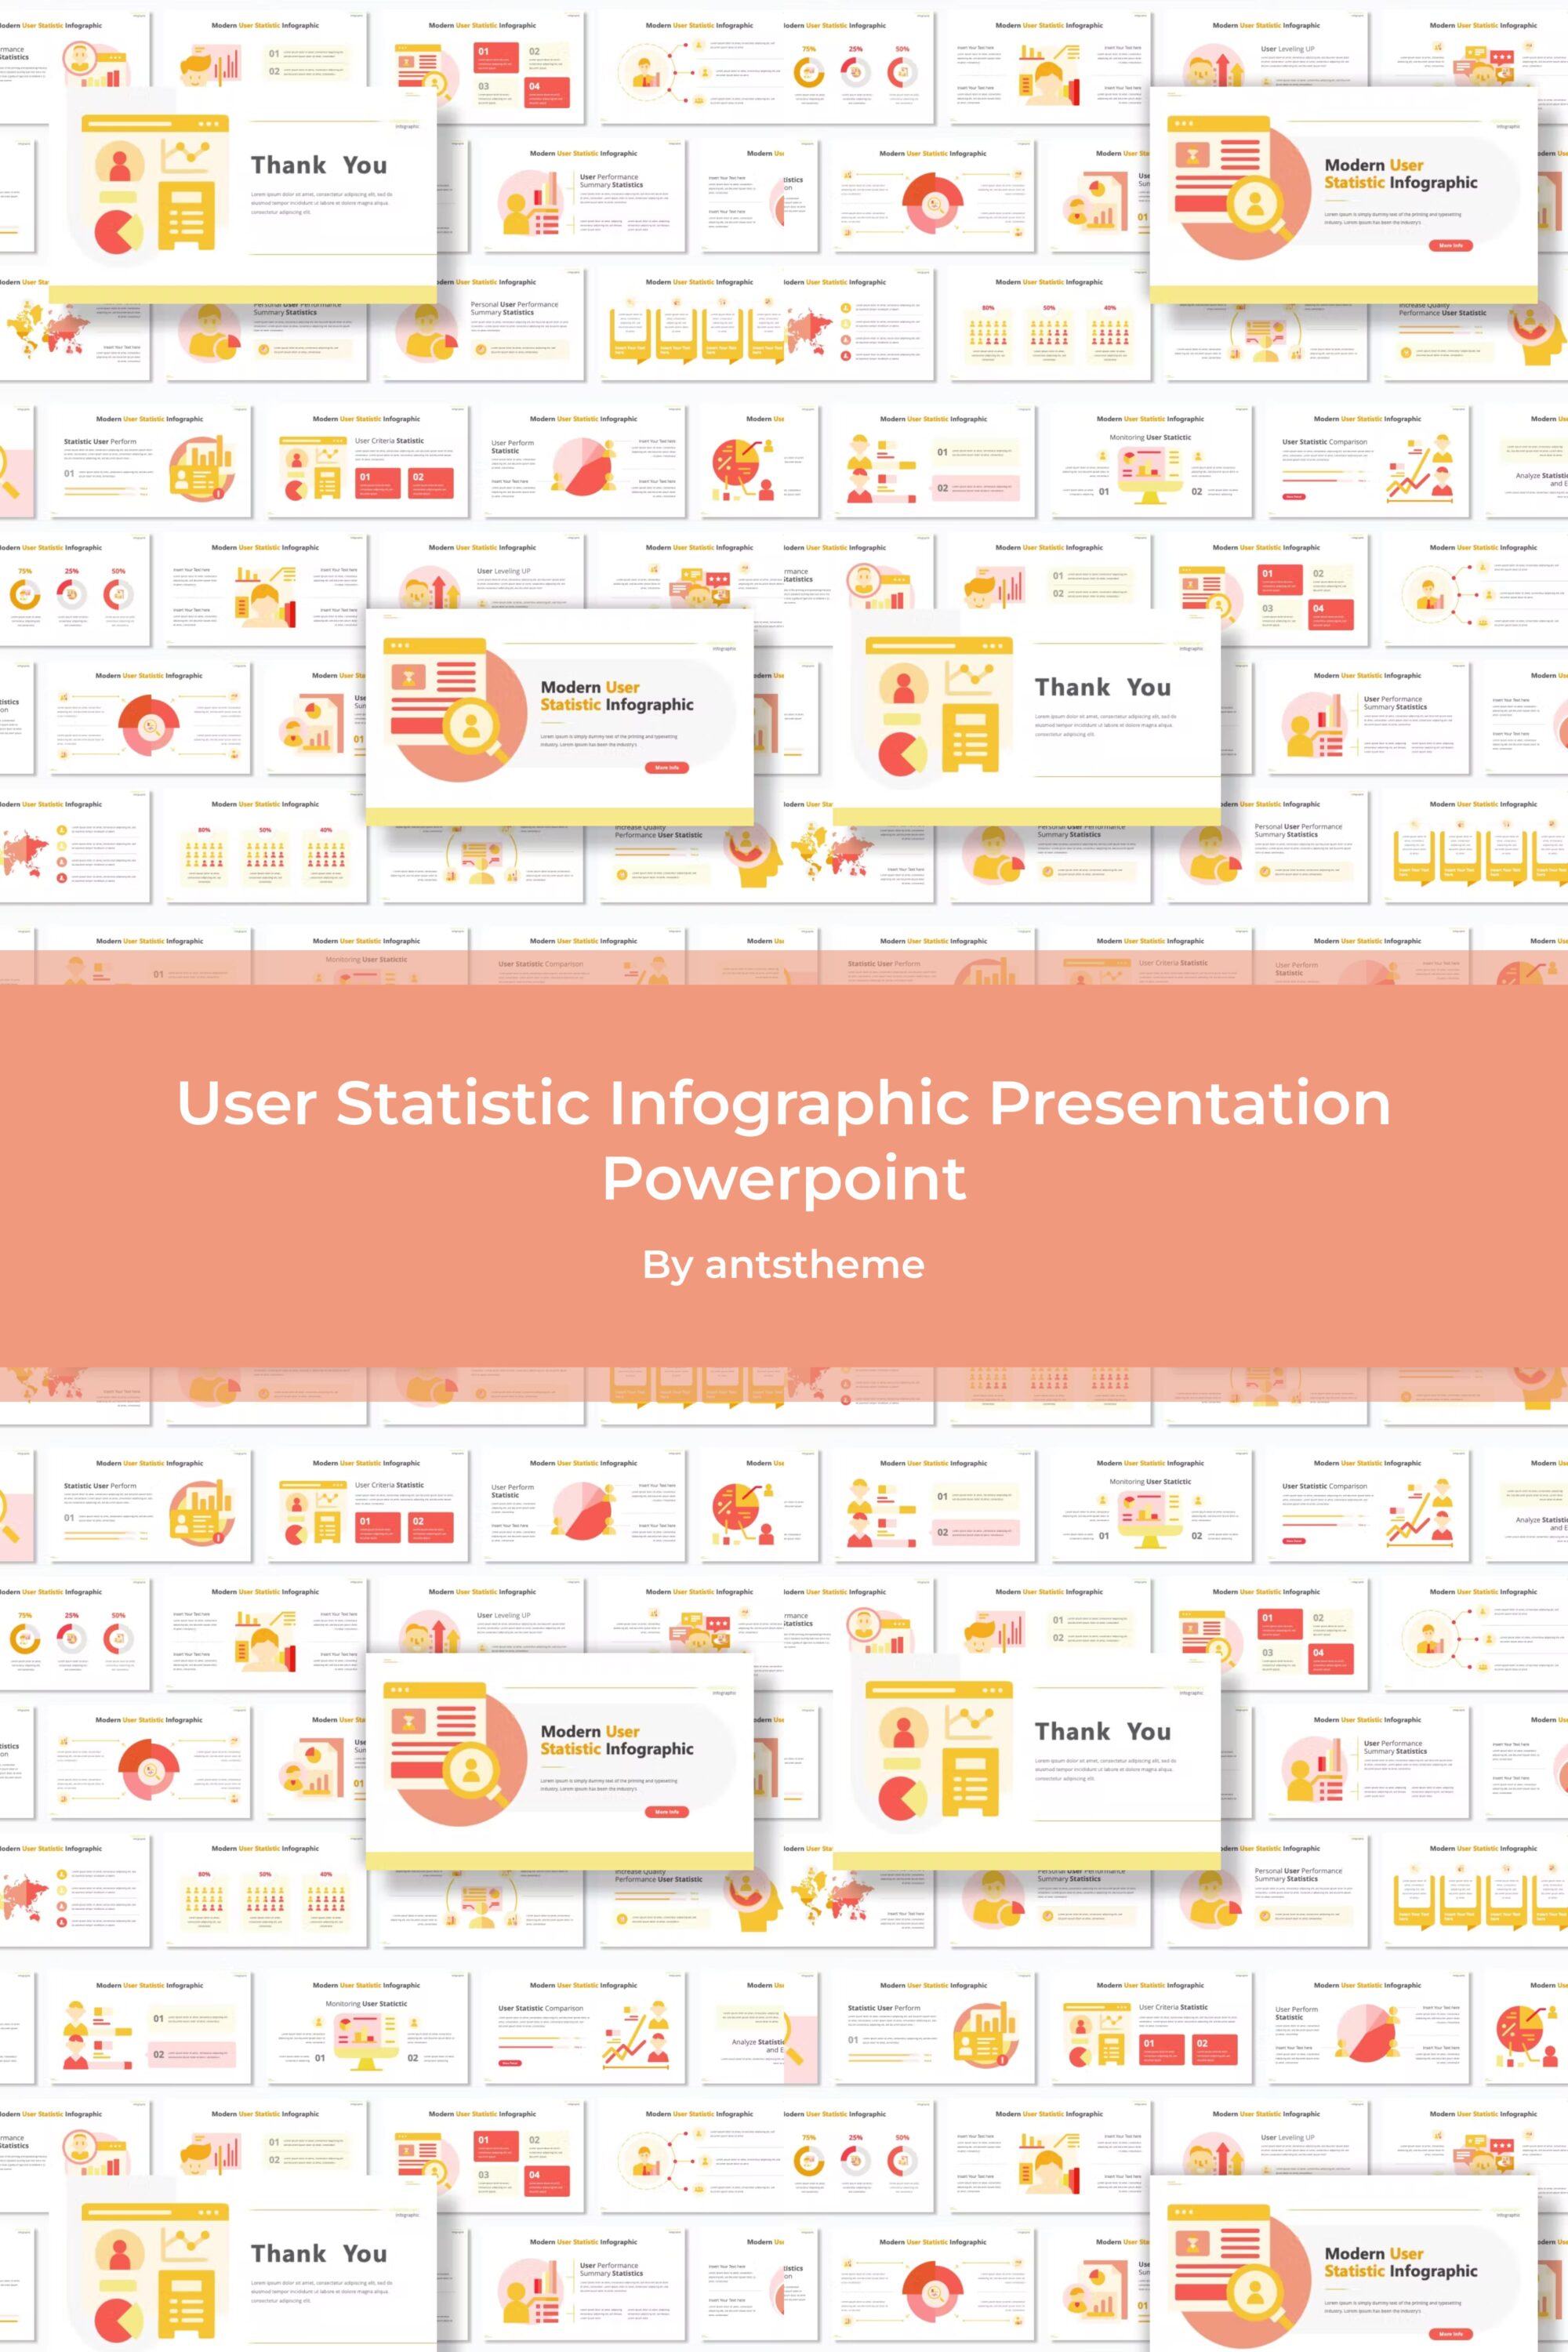 User Statistic Infographic Presentation Powerpoint - pinterest image preview.